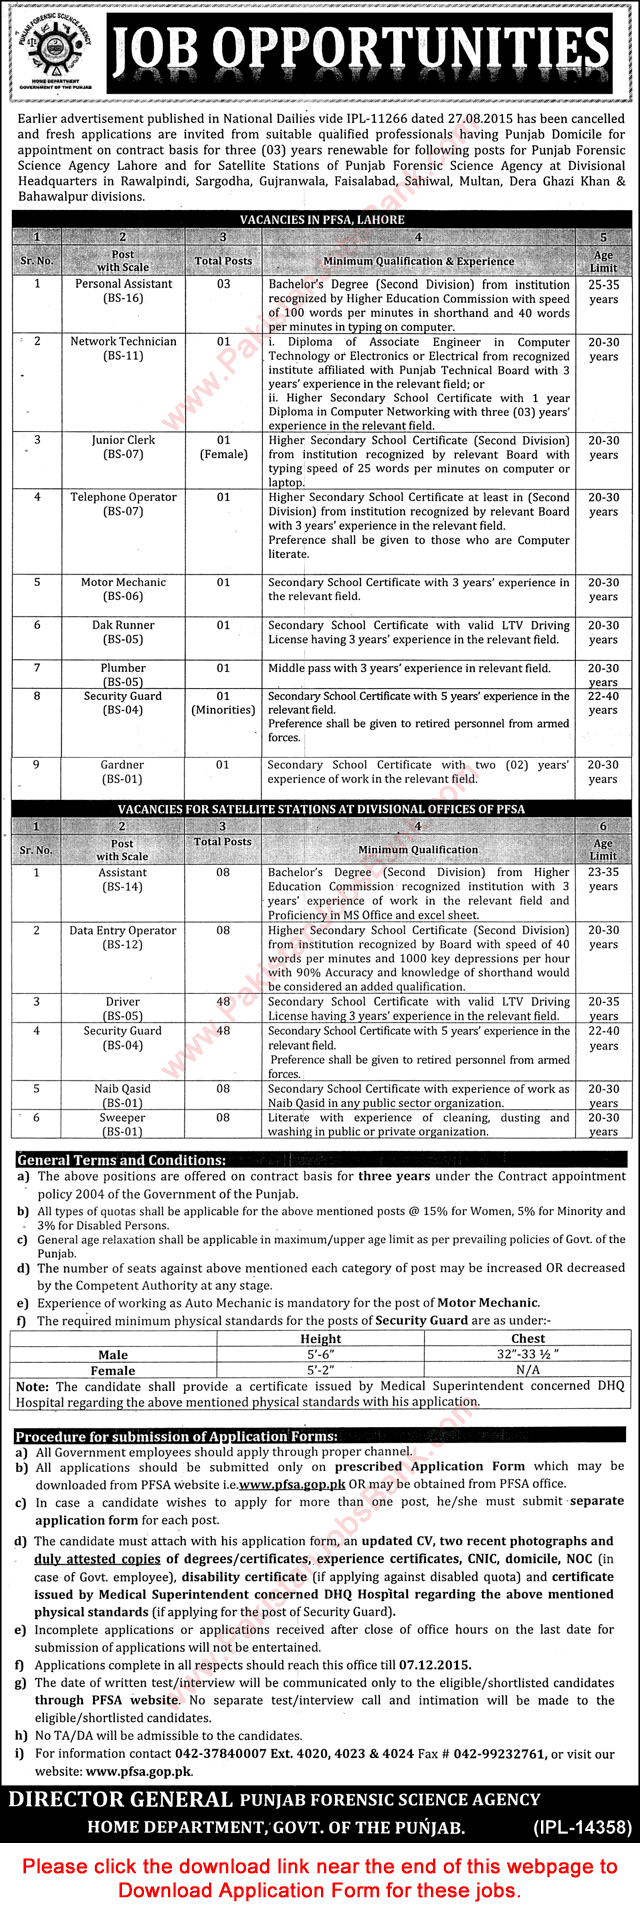 Punjab Forensic Science Agency Jobs November 2015 PFSA Application Form Download Assistants, DEO, Drivers, Security Guards & Others